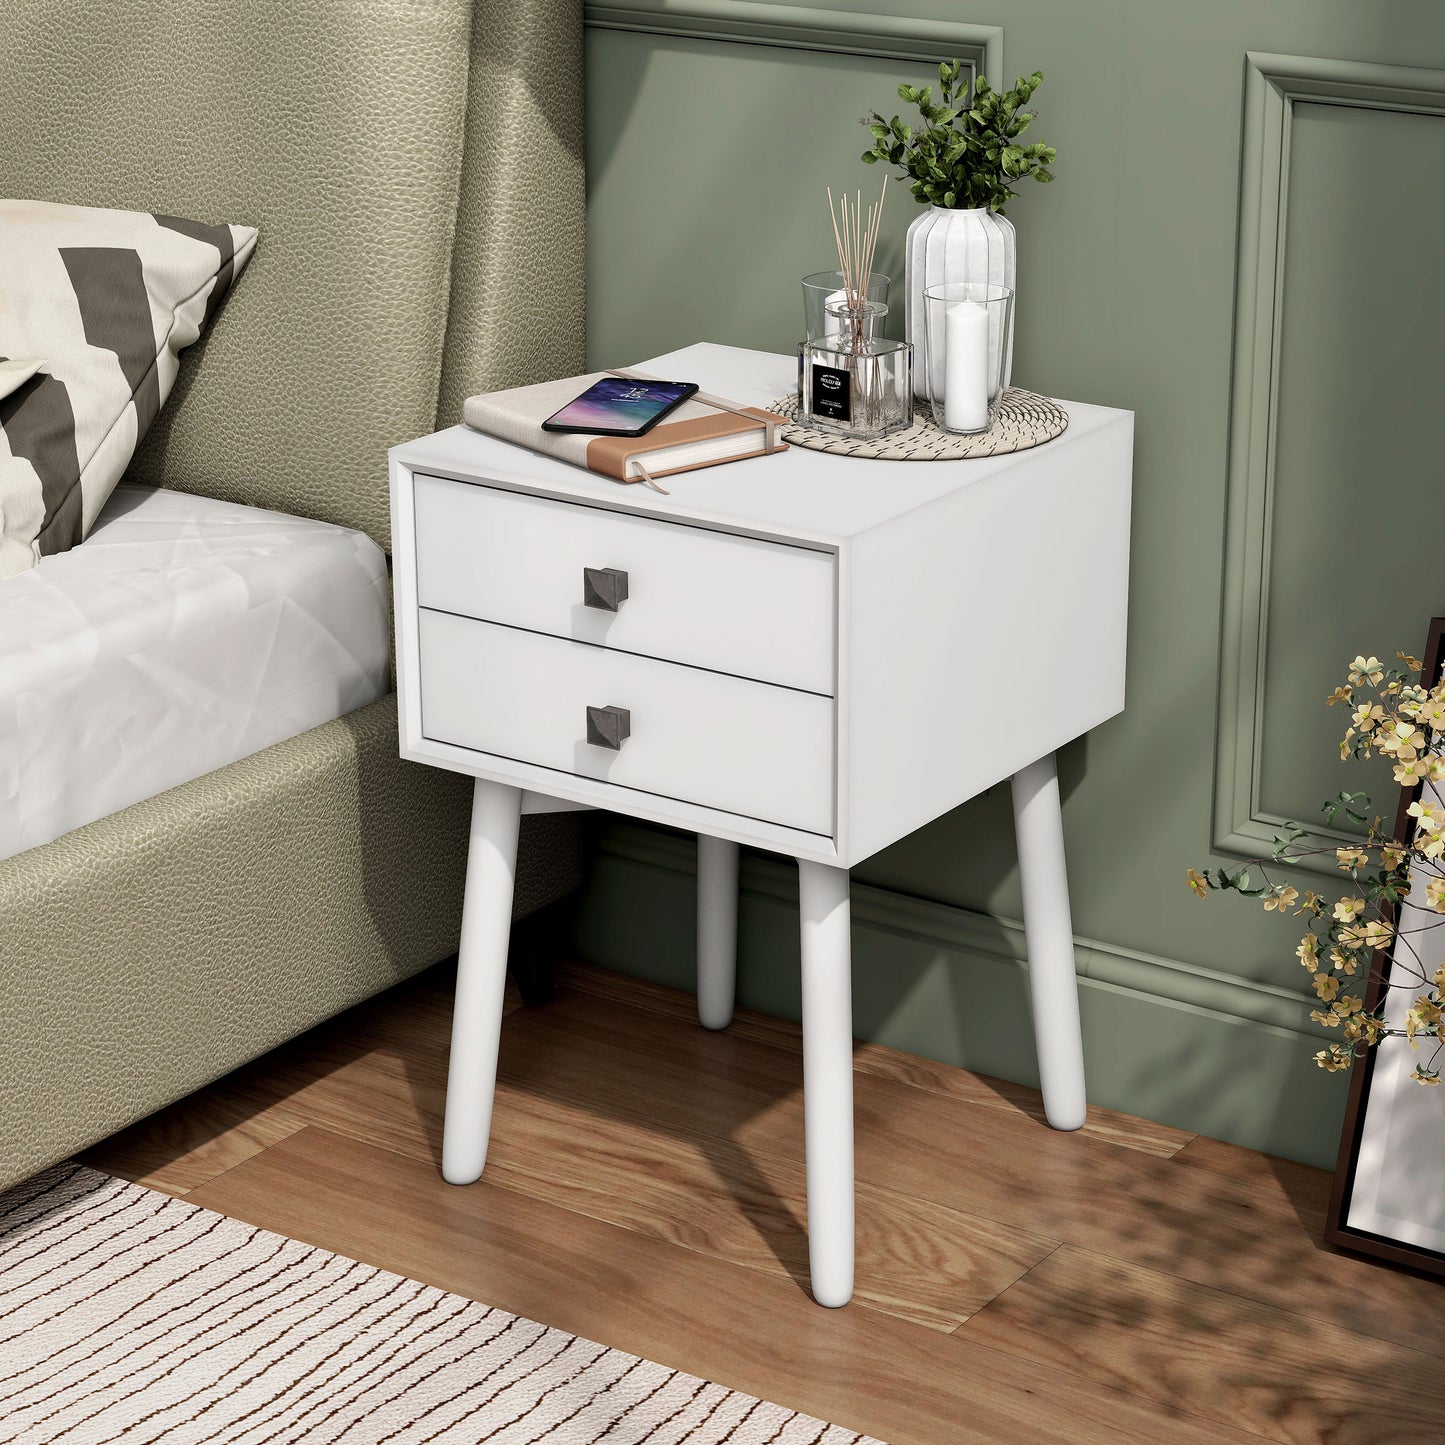 Left angled modern white two-drawer compact nightstand with splayed legs in a bedroom with accessories